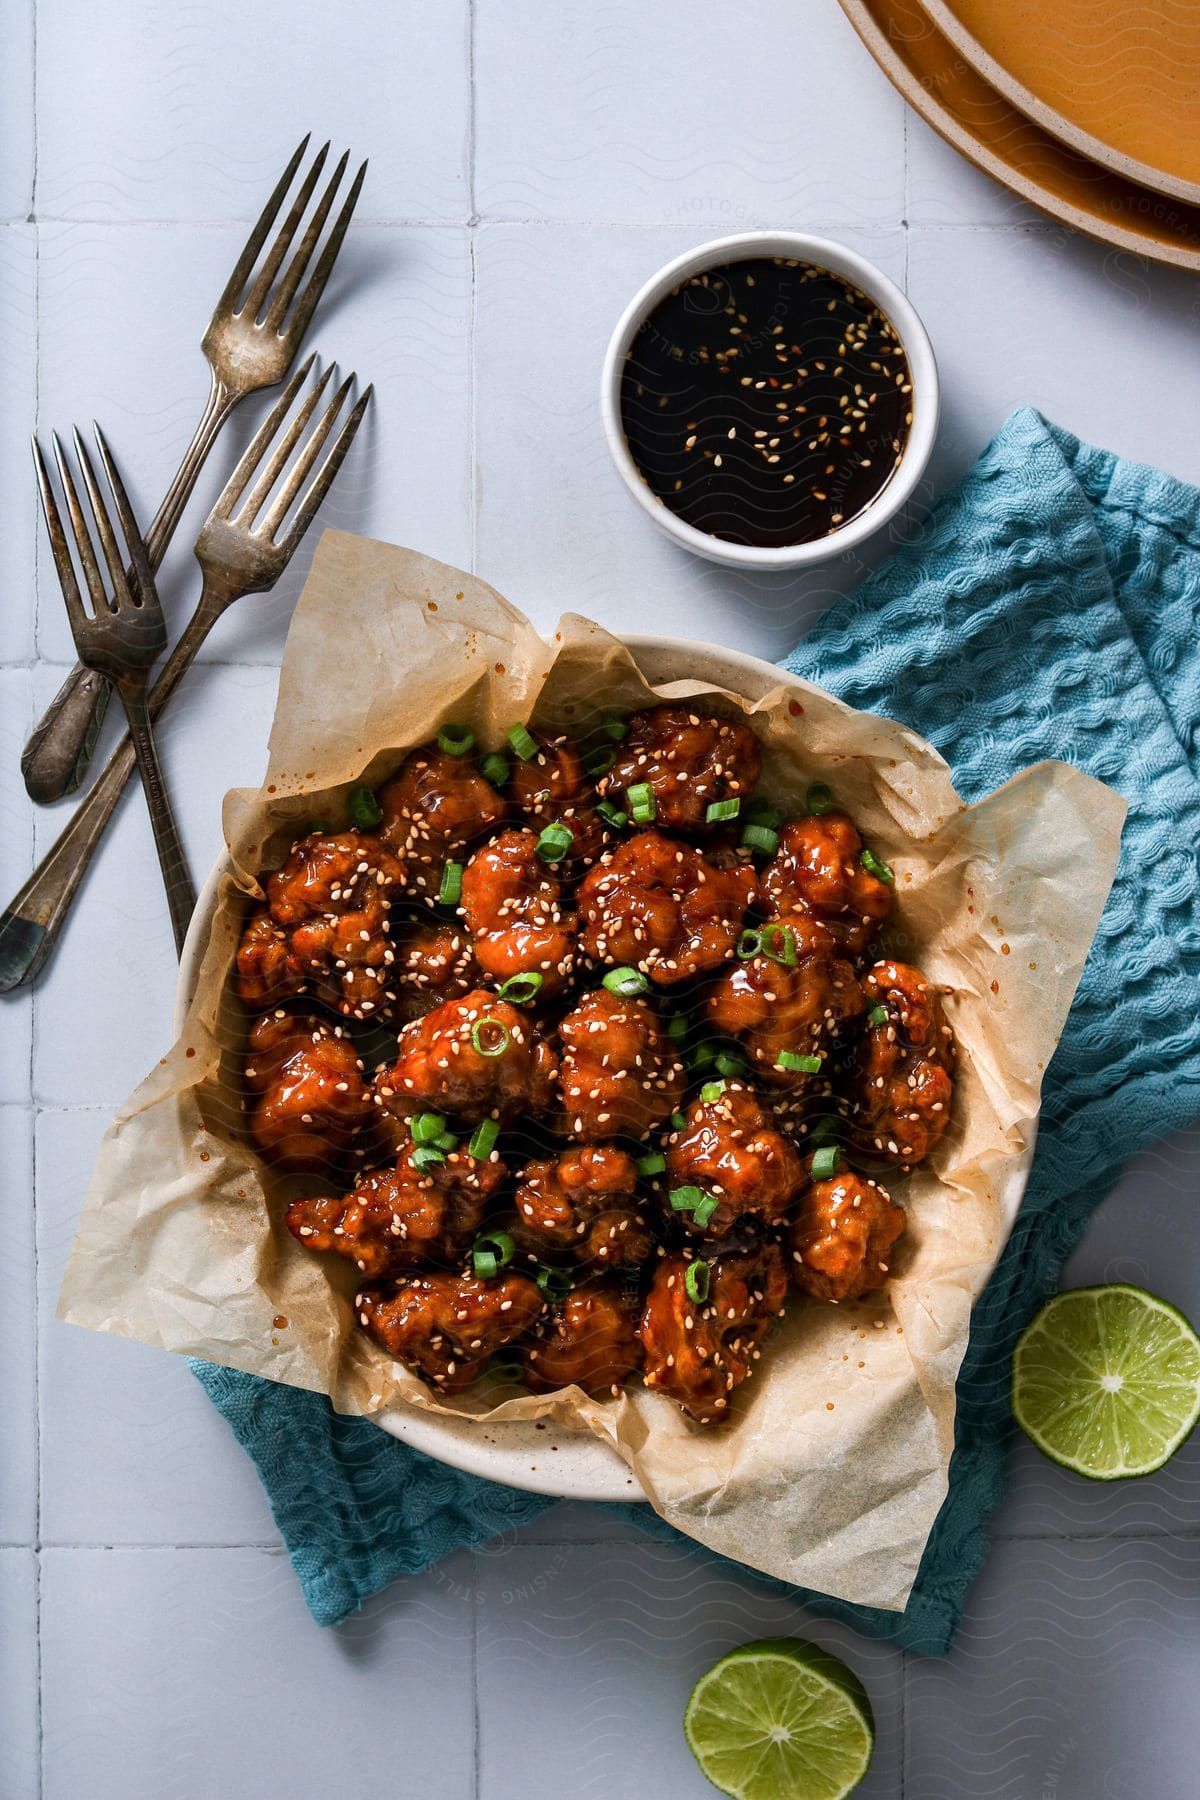 Chicken bites with seasoning in a bowl accompanied by three forks and a halved lime